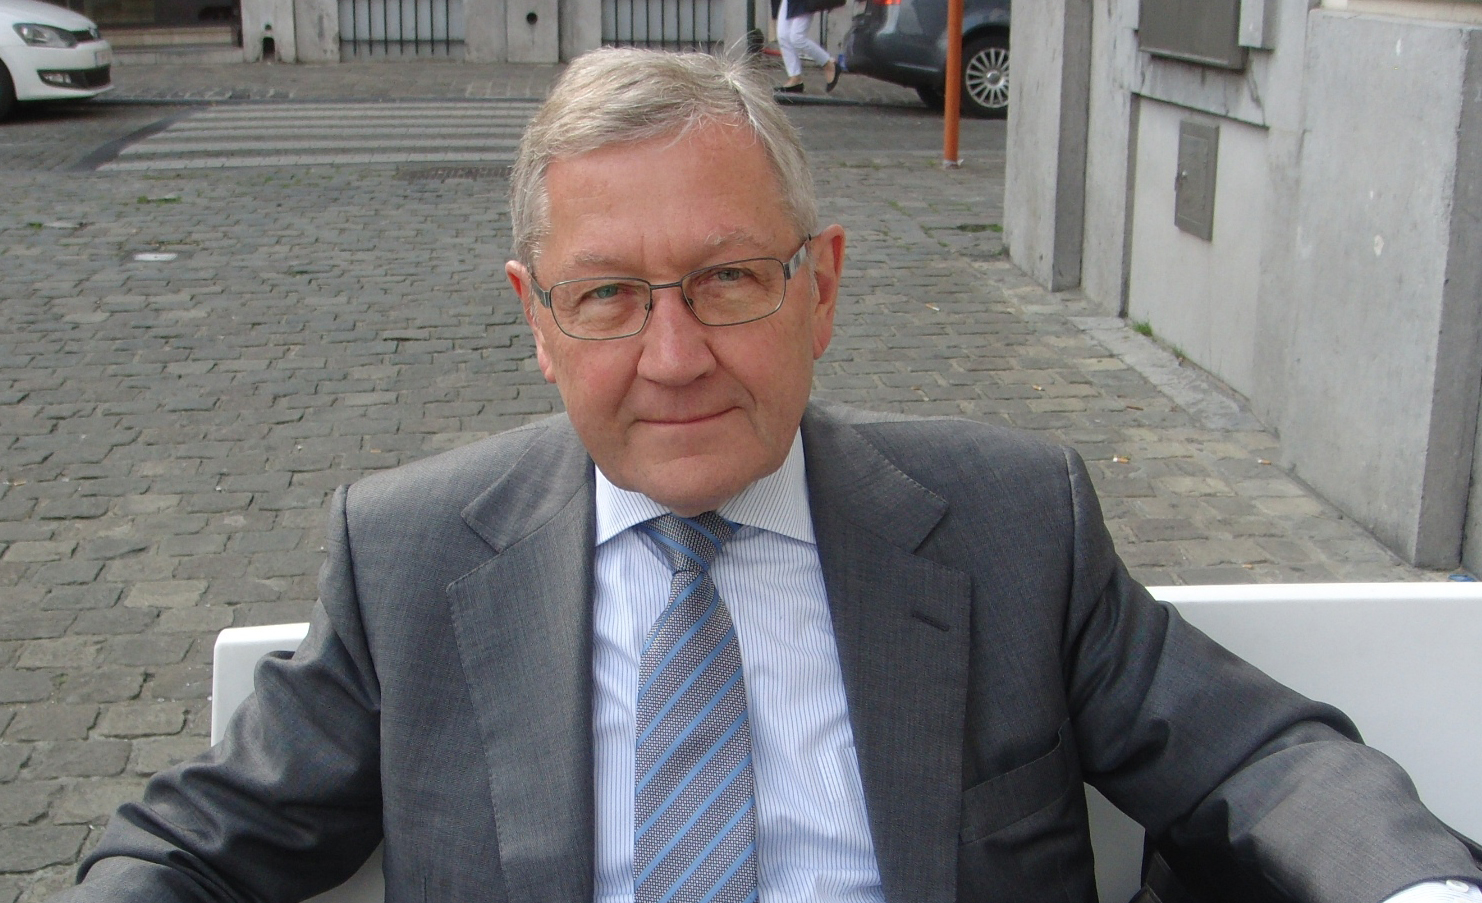 The managing director of the European Stability Mechanism (ESM) Klaus Regling